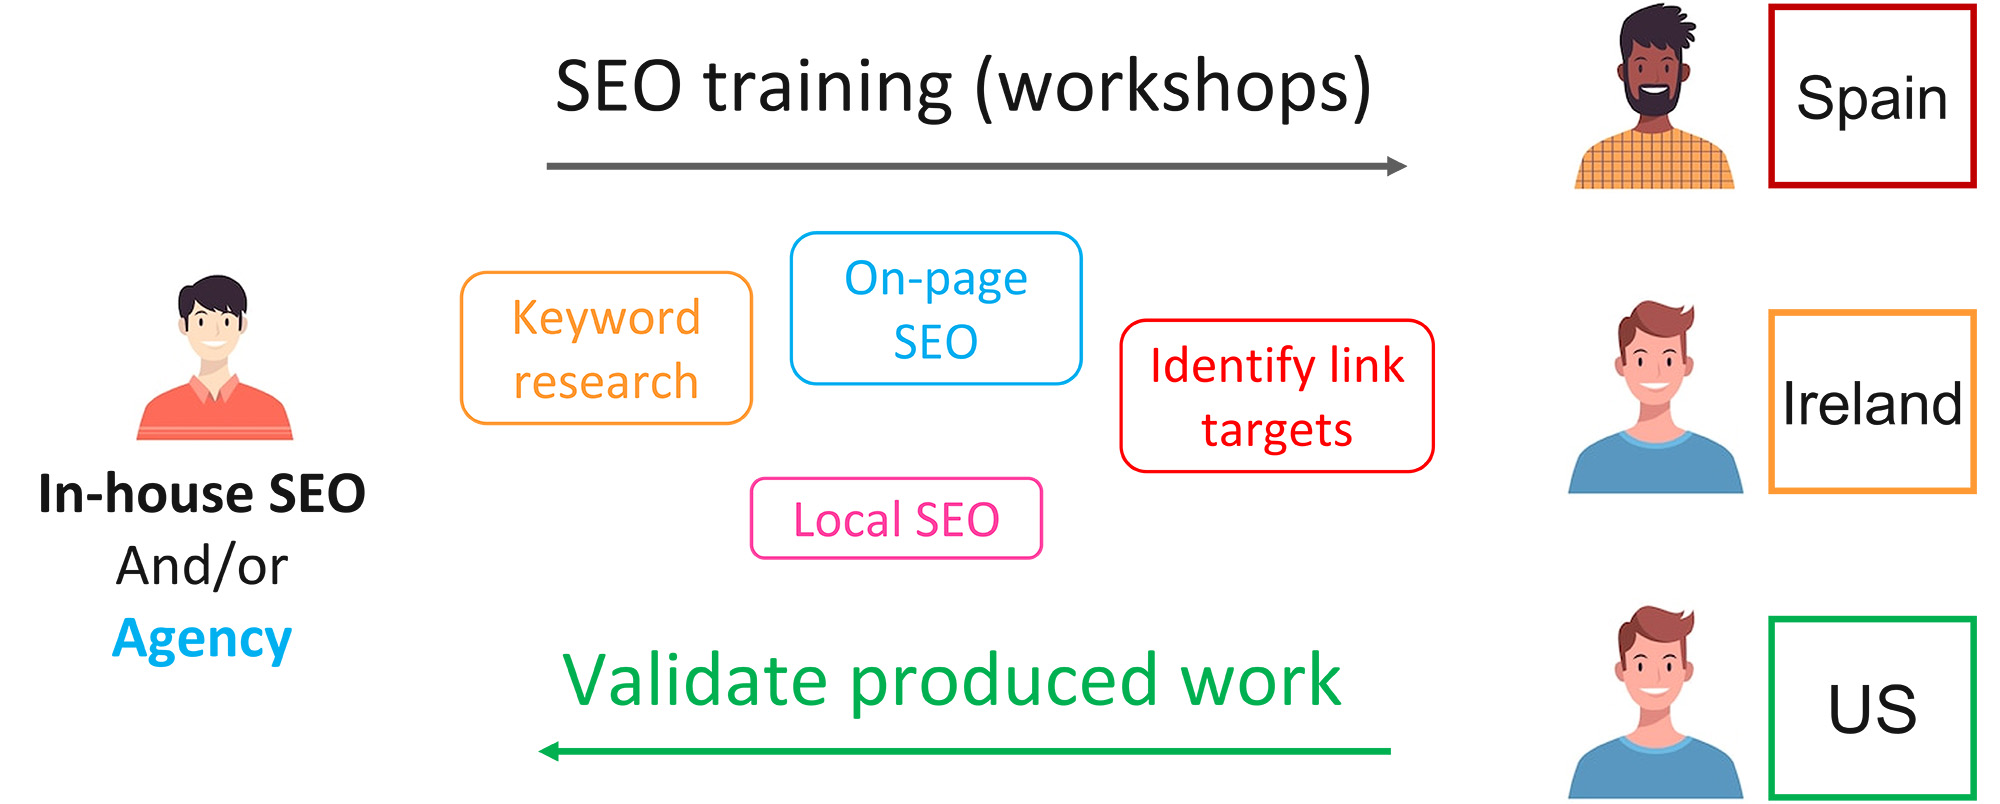 How to use internal staff for deliver SEO